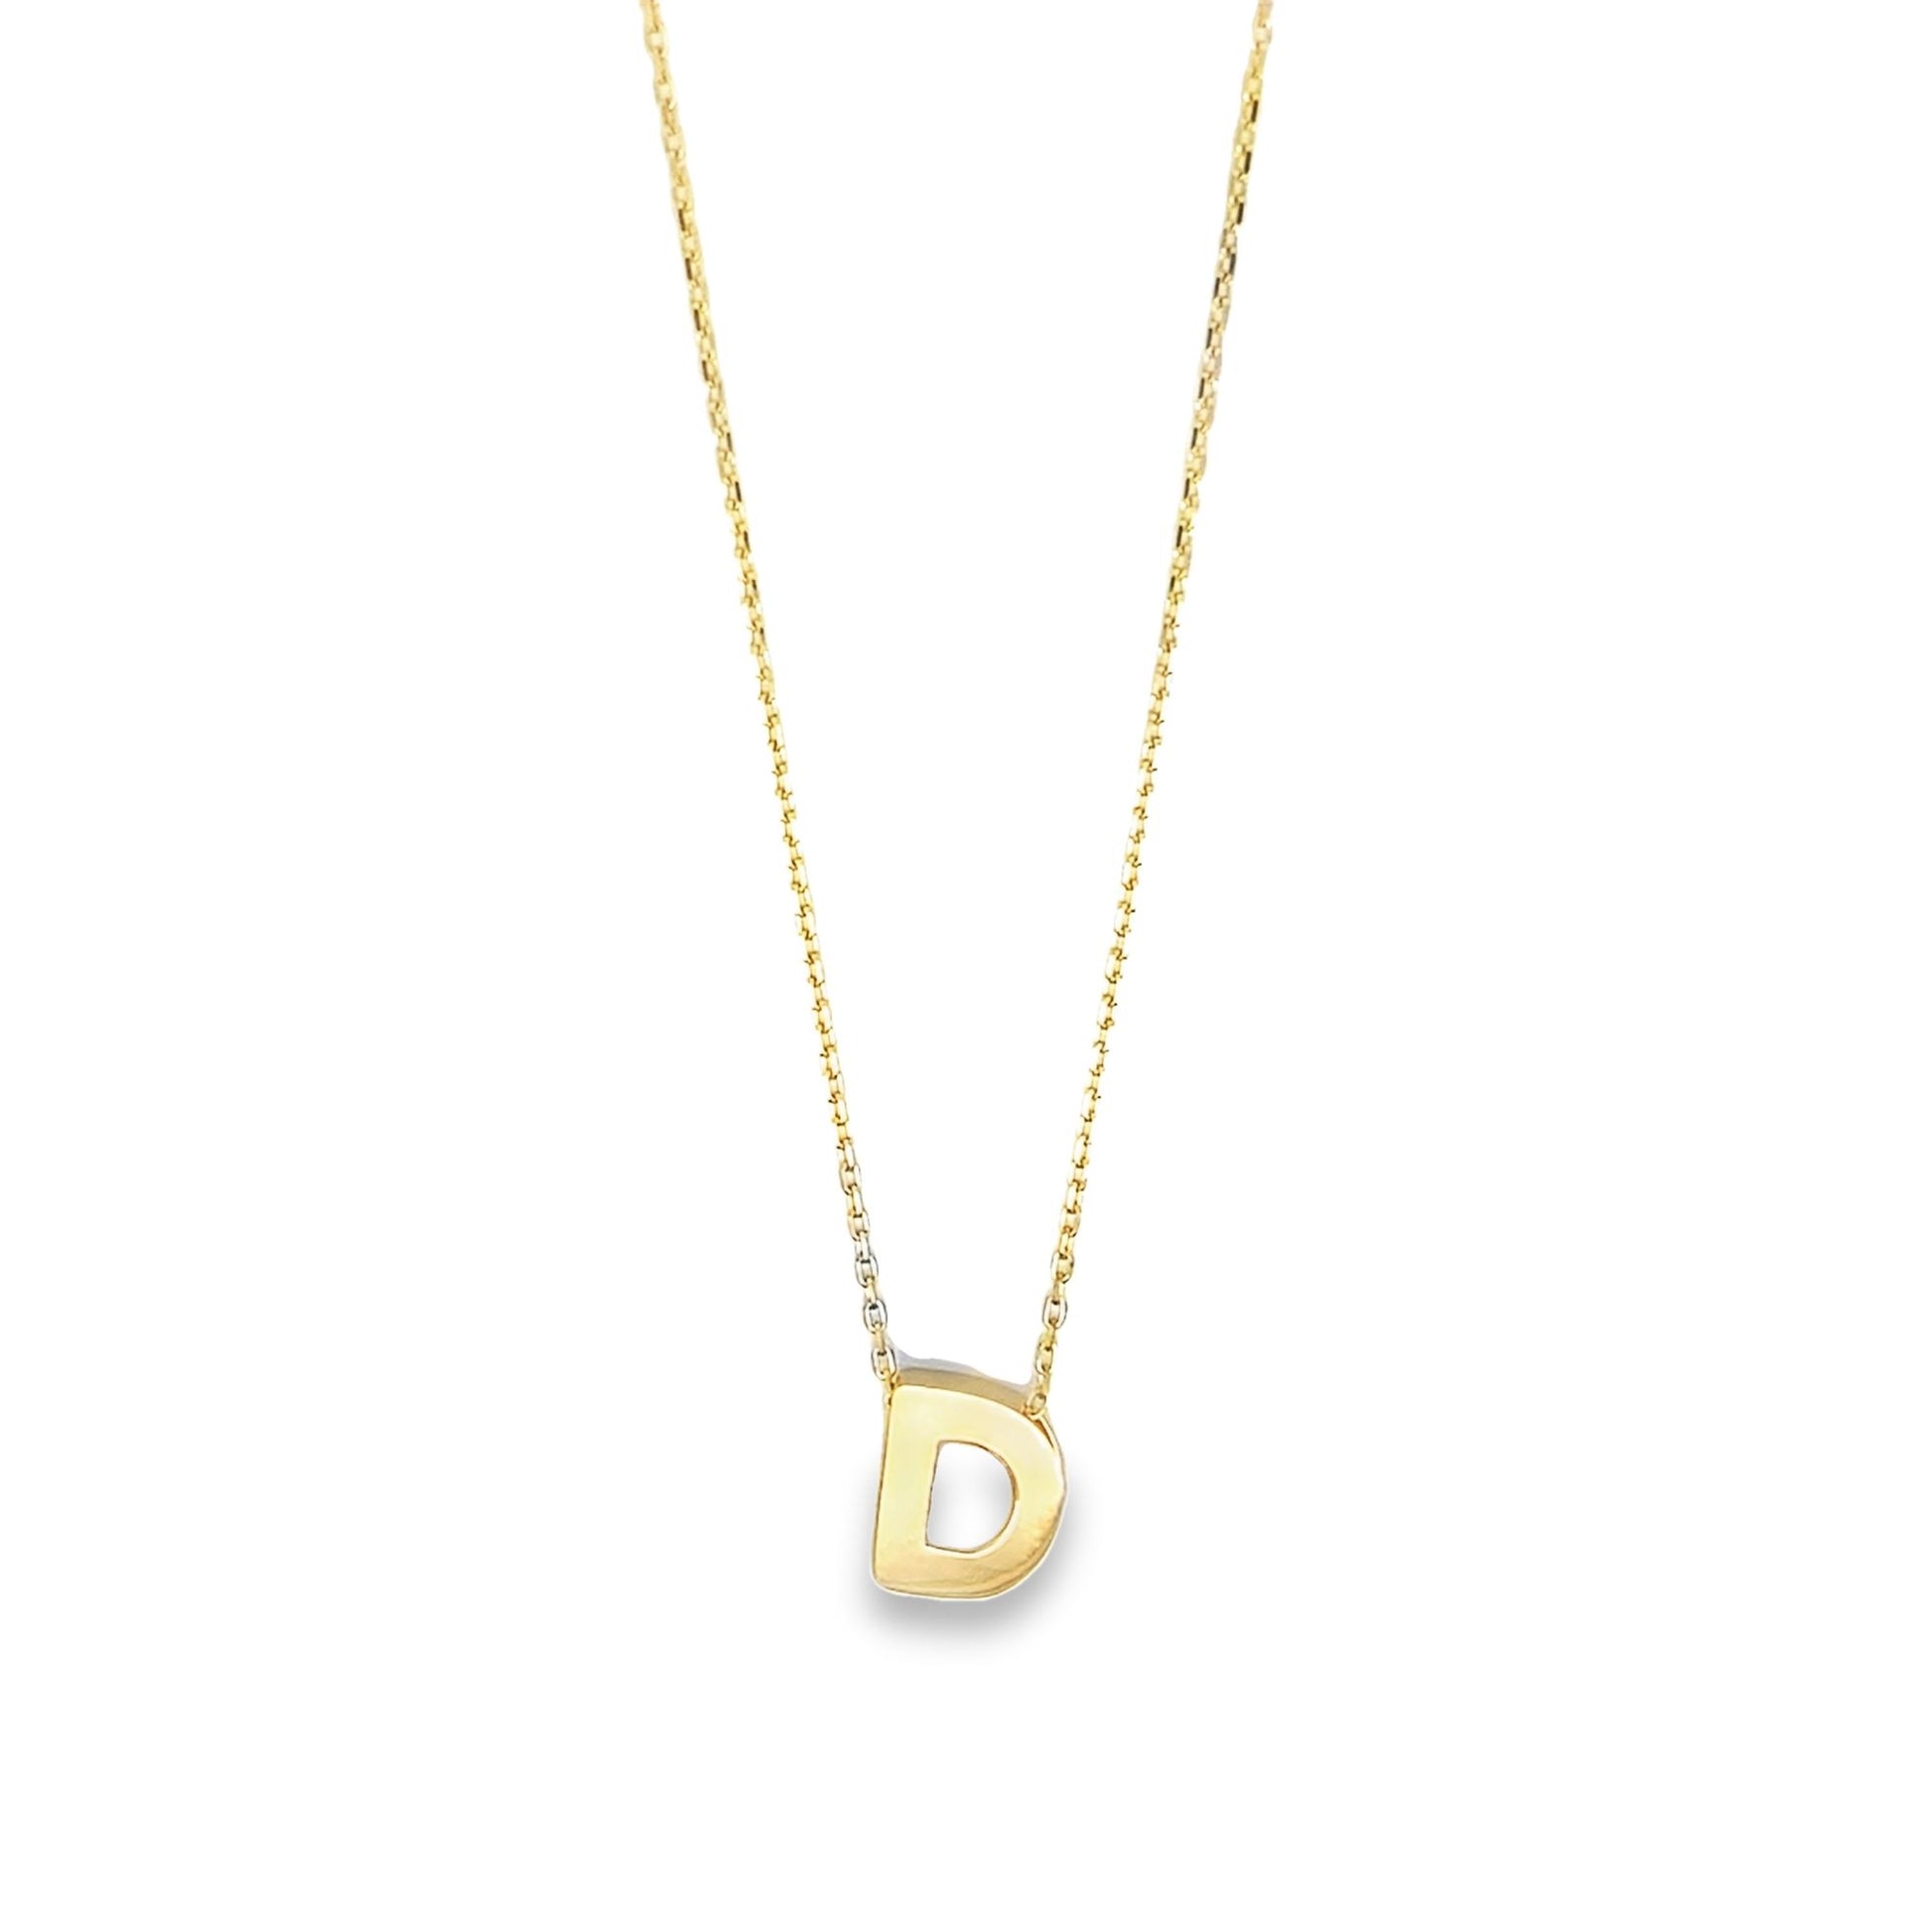 14K Yellow Gold Letter "D" Necklace 18In